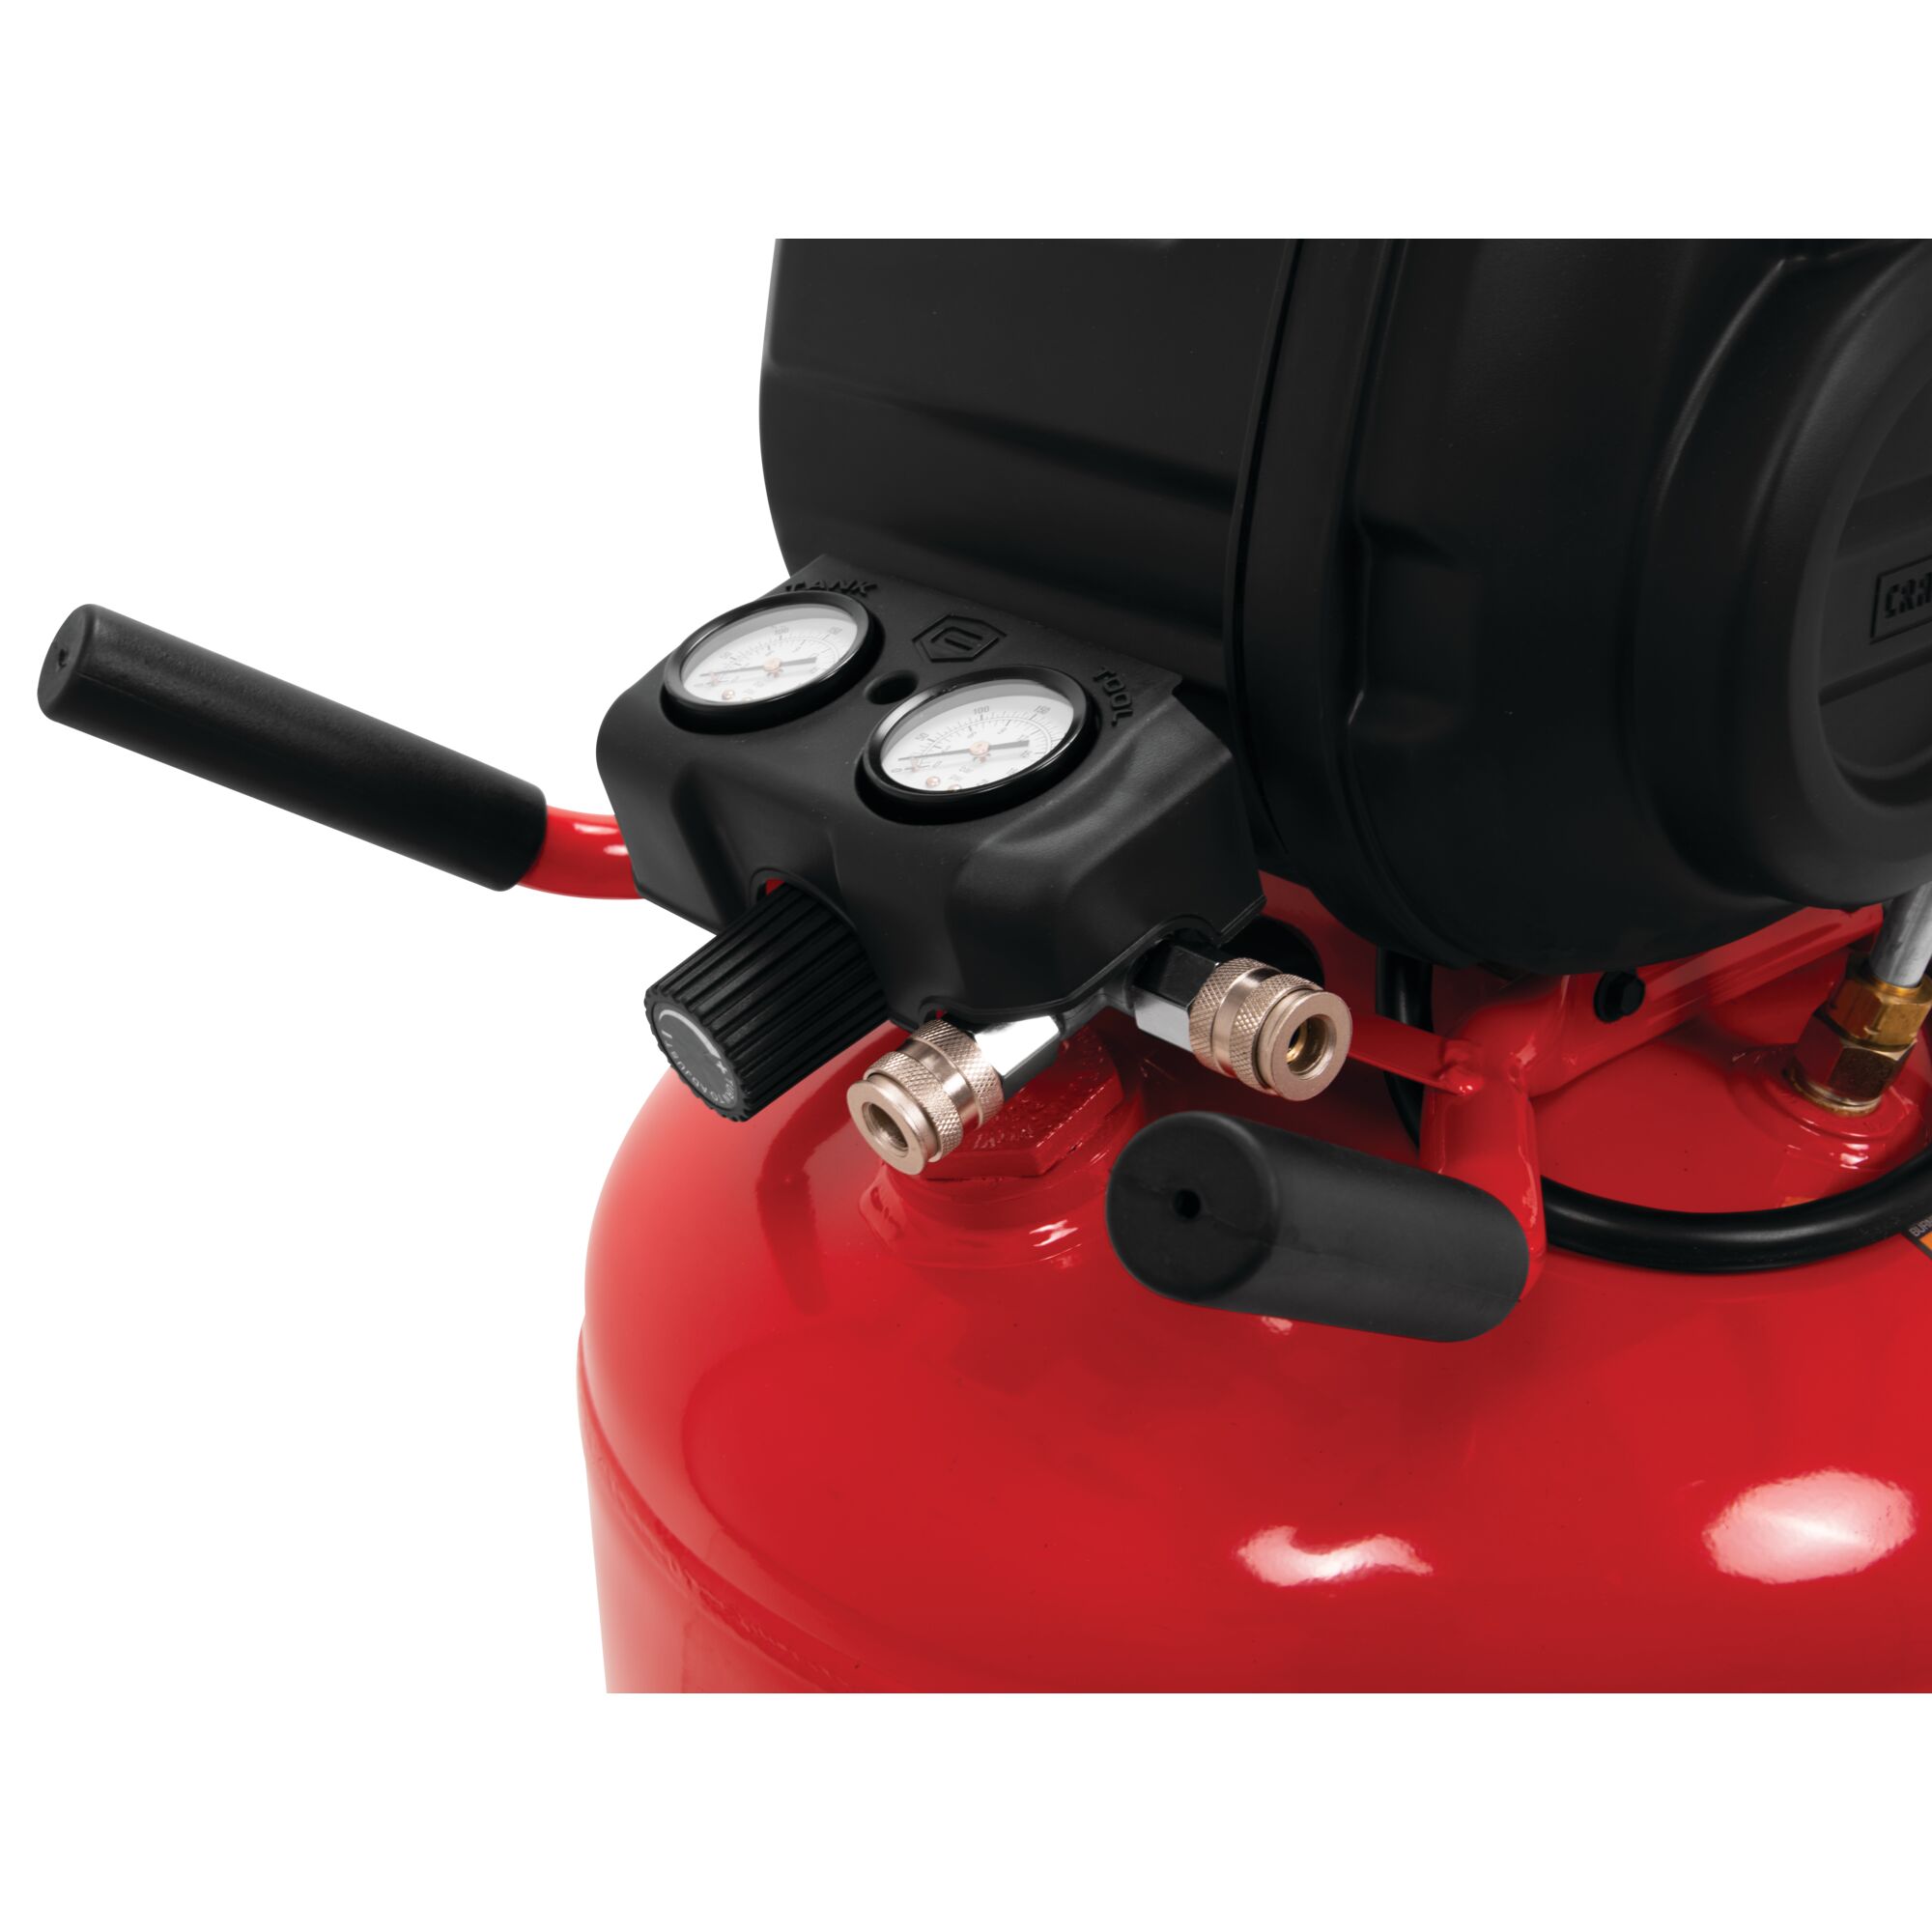 Plugs into standard 120 volt household outlet feature of 33 gallons 175 p s i oil free portable vertical air compressor.